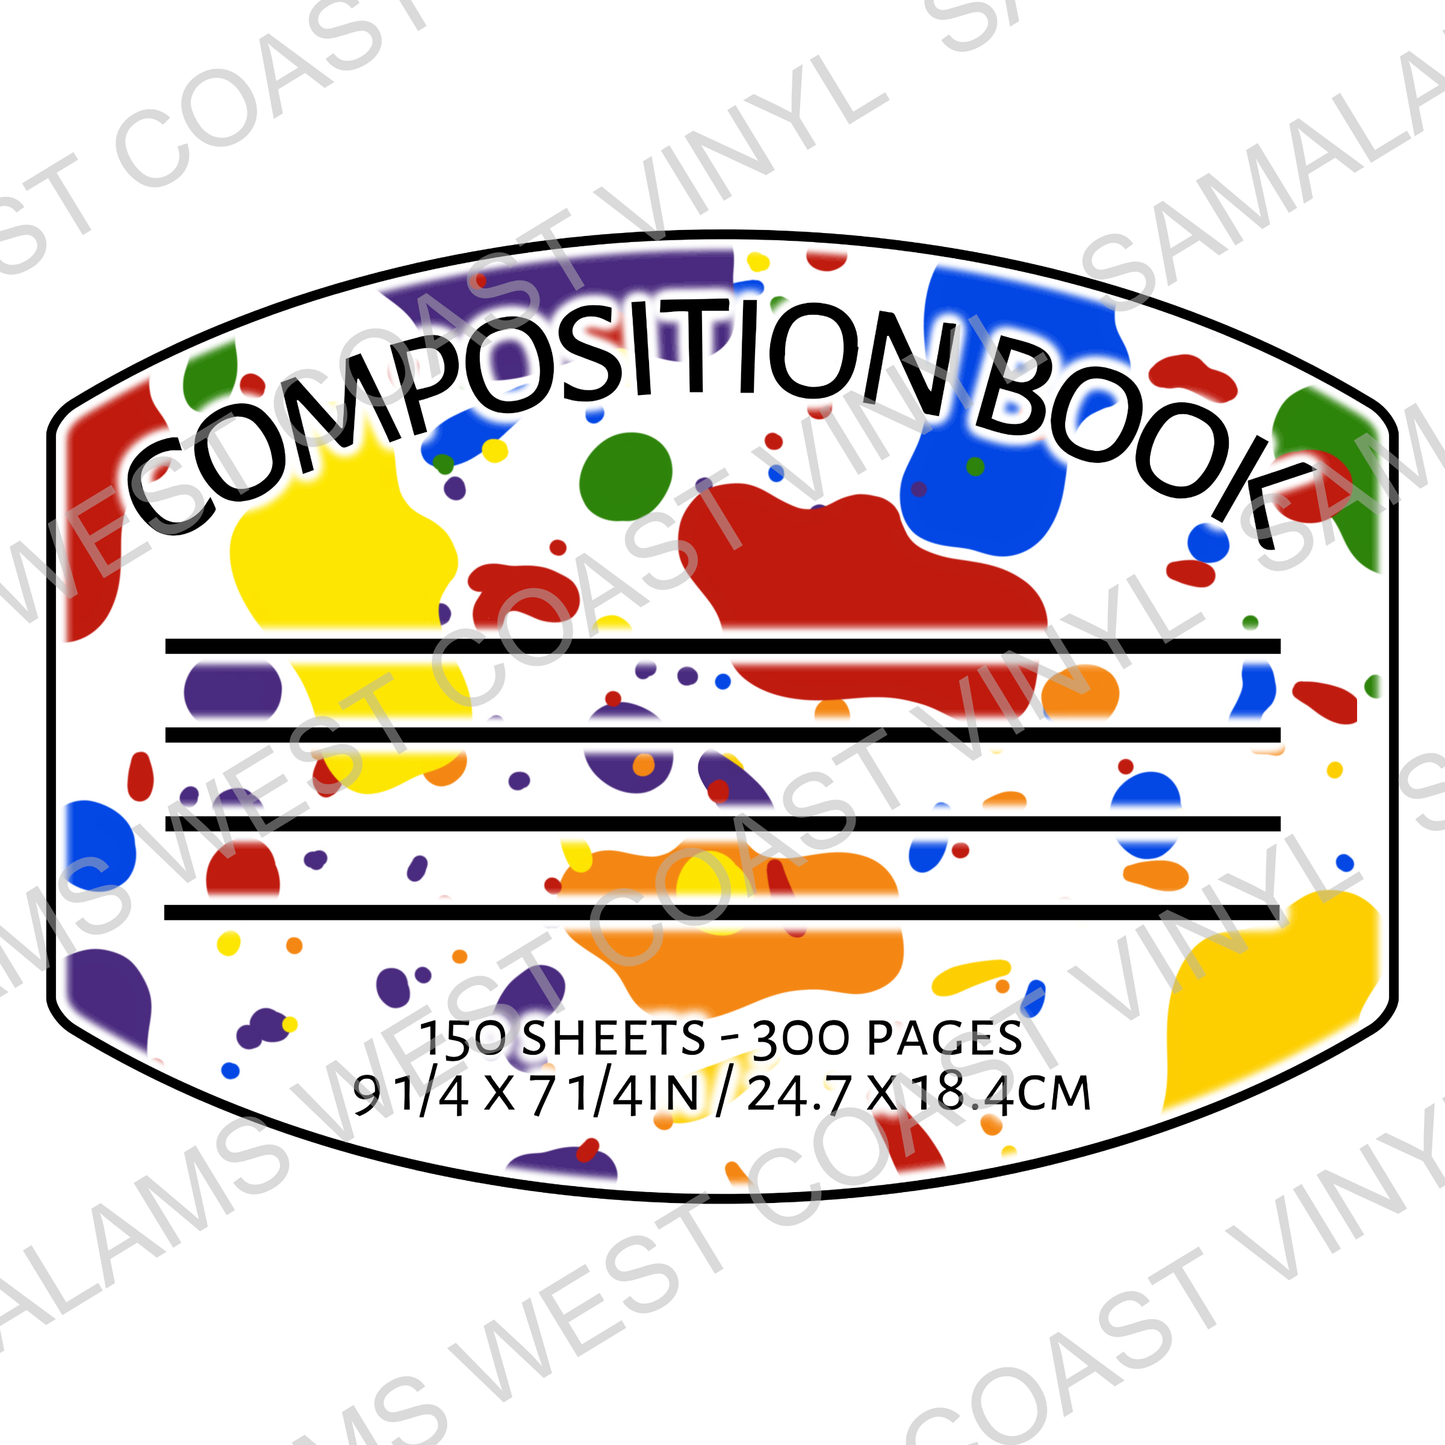 Composition Book Labels - Pack 1